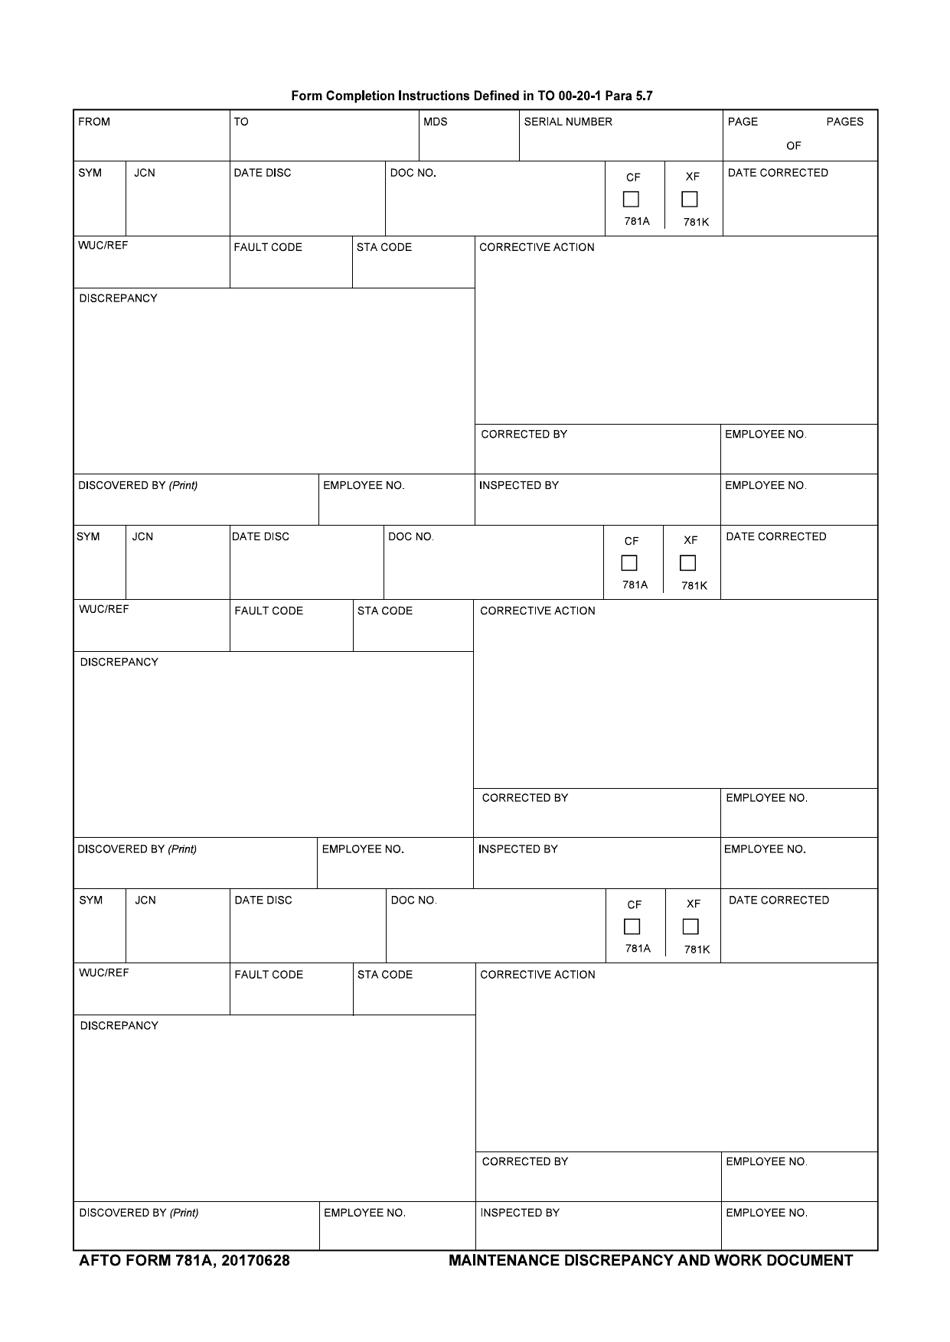 AFTO Form 781A Maintenance Discrepancy and Work Document, Page 1